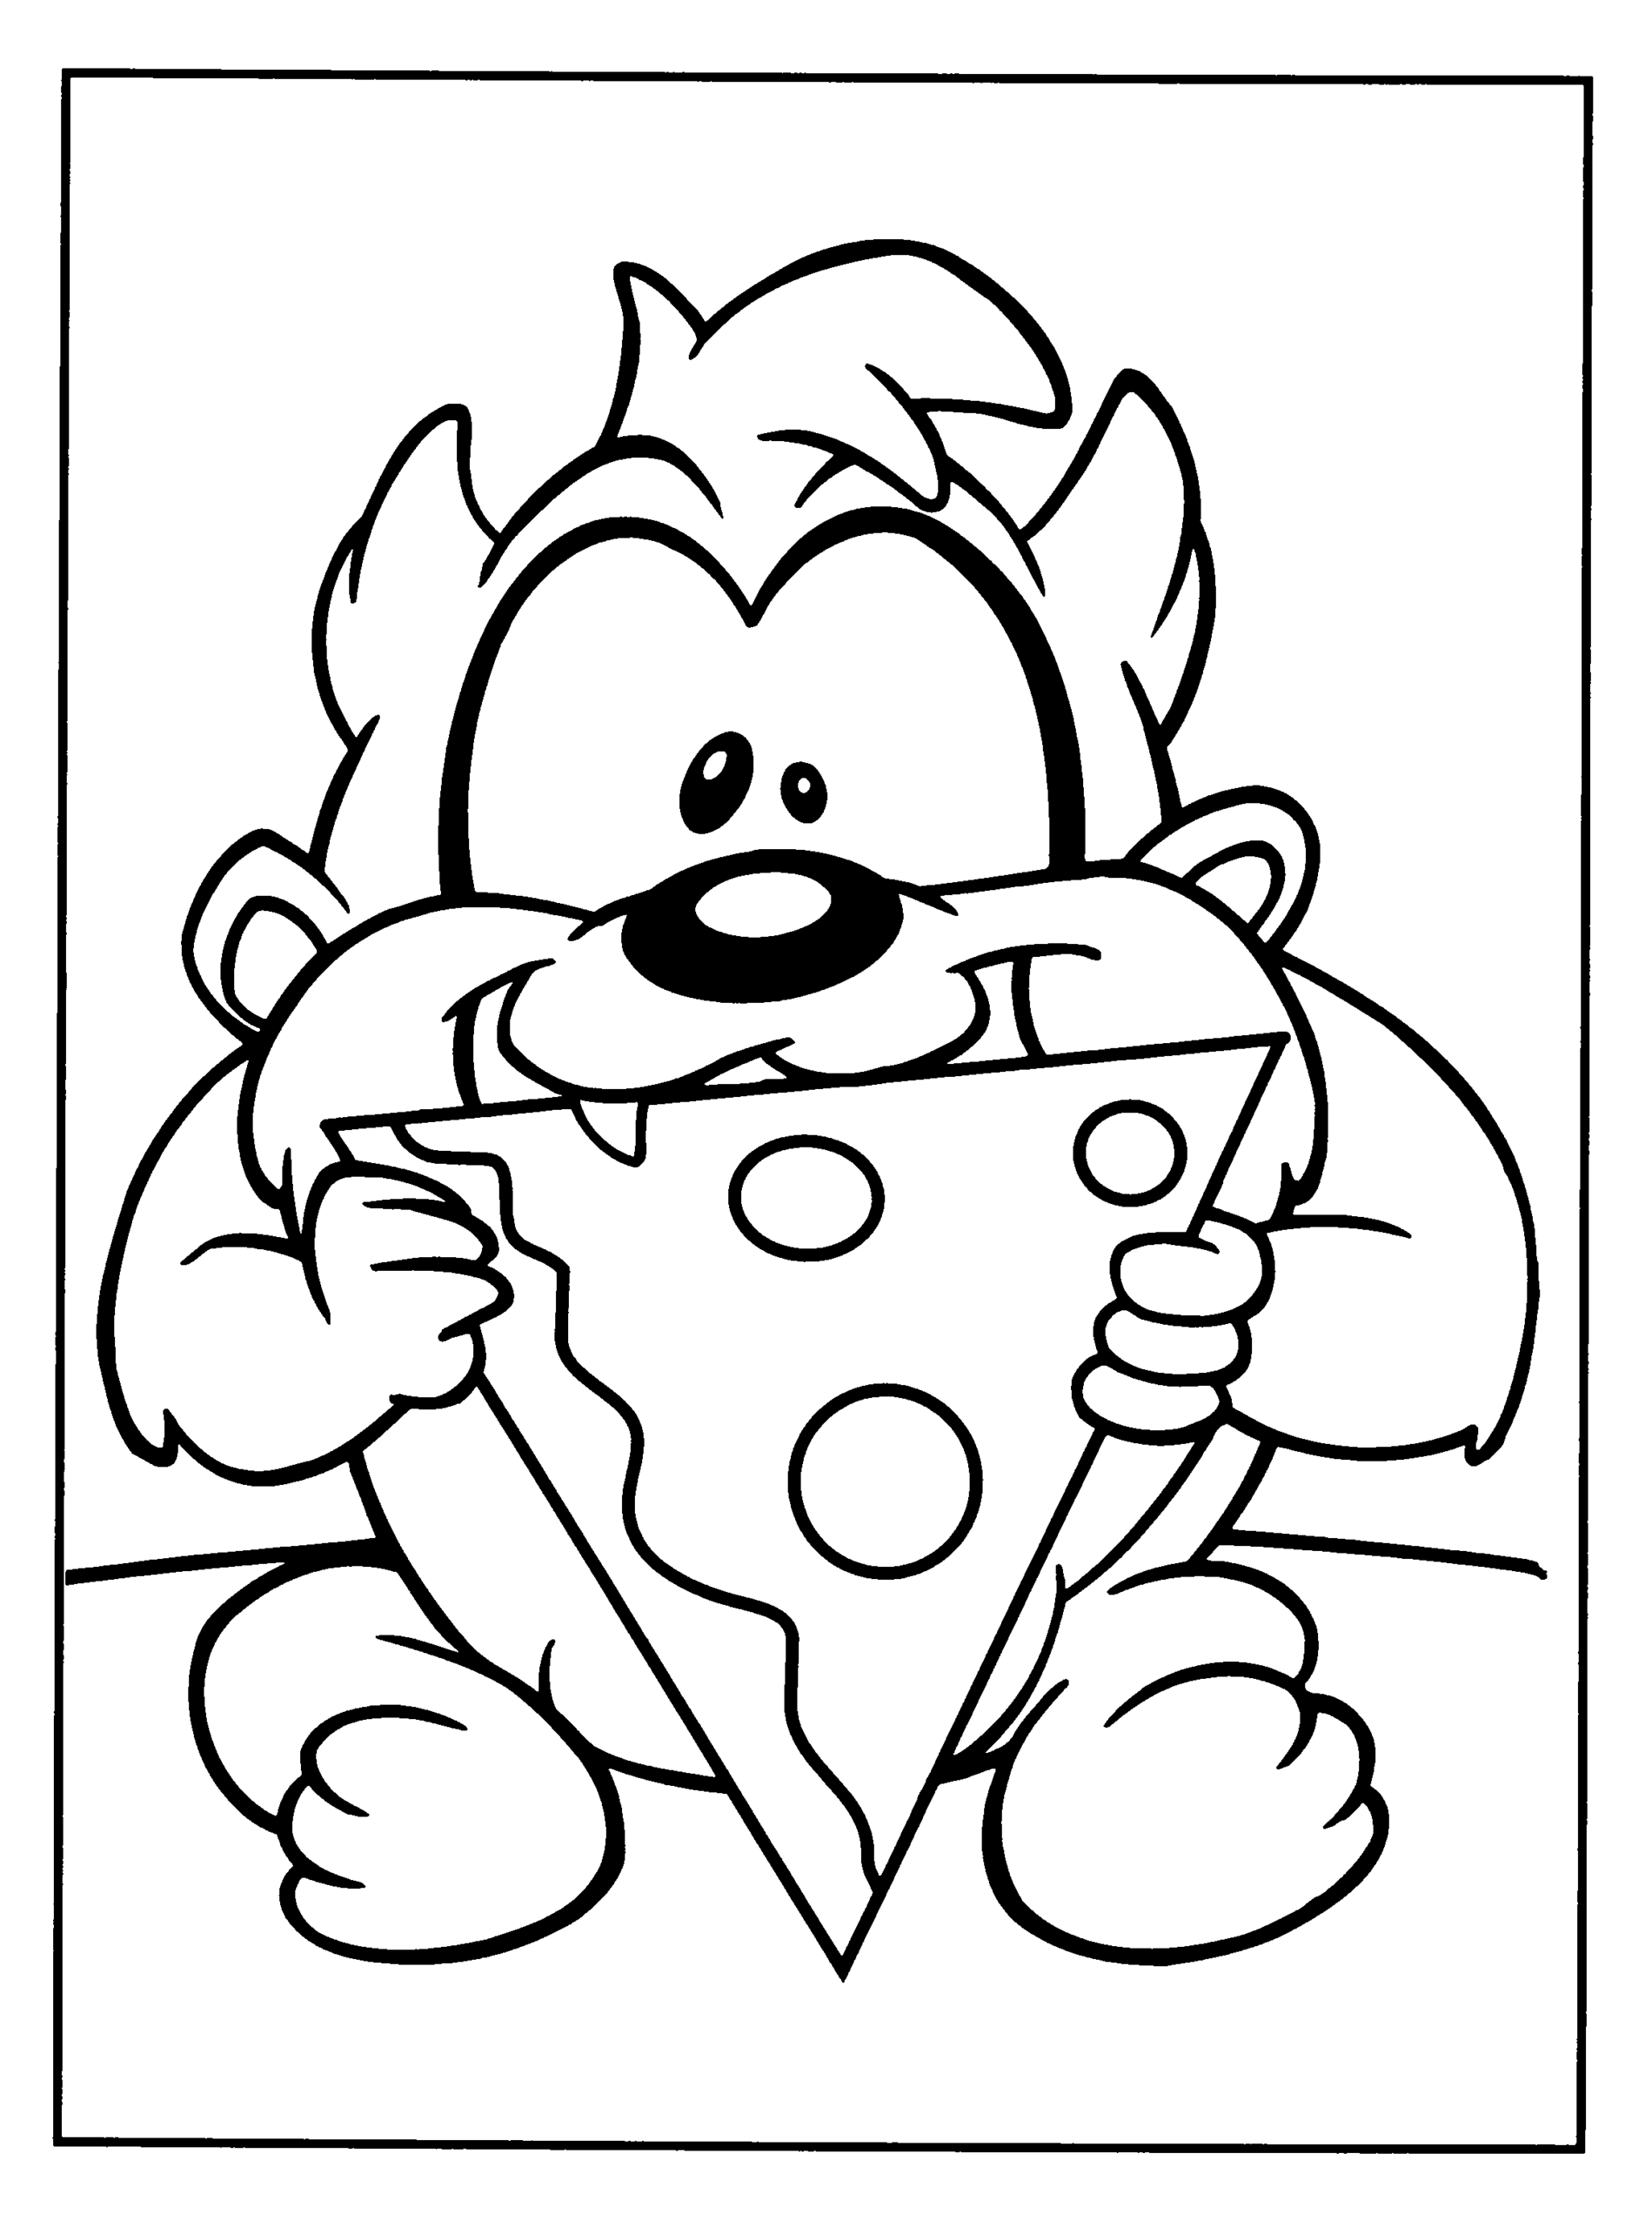 Baby Looney Tunes Coloring Pages Tv Film Baby Looney Tunes 2 Printable 2020 00424 Coloring4free Coloring4free Com